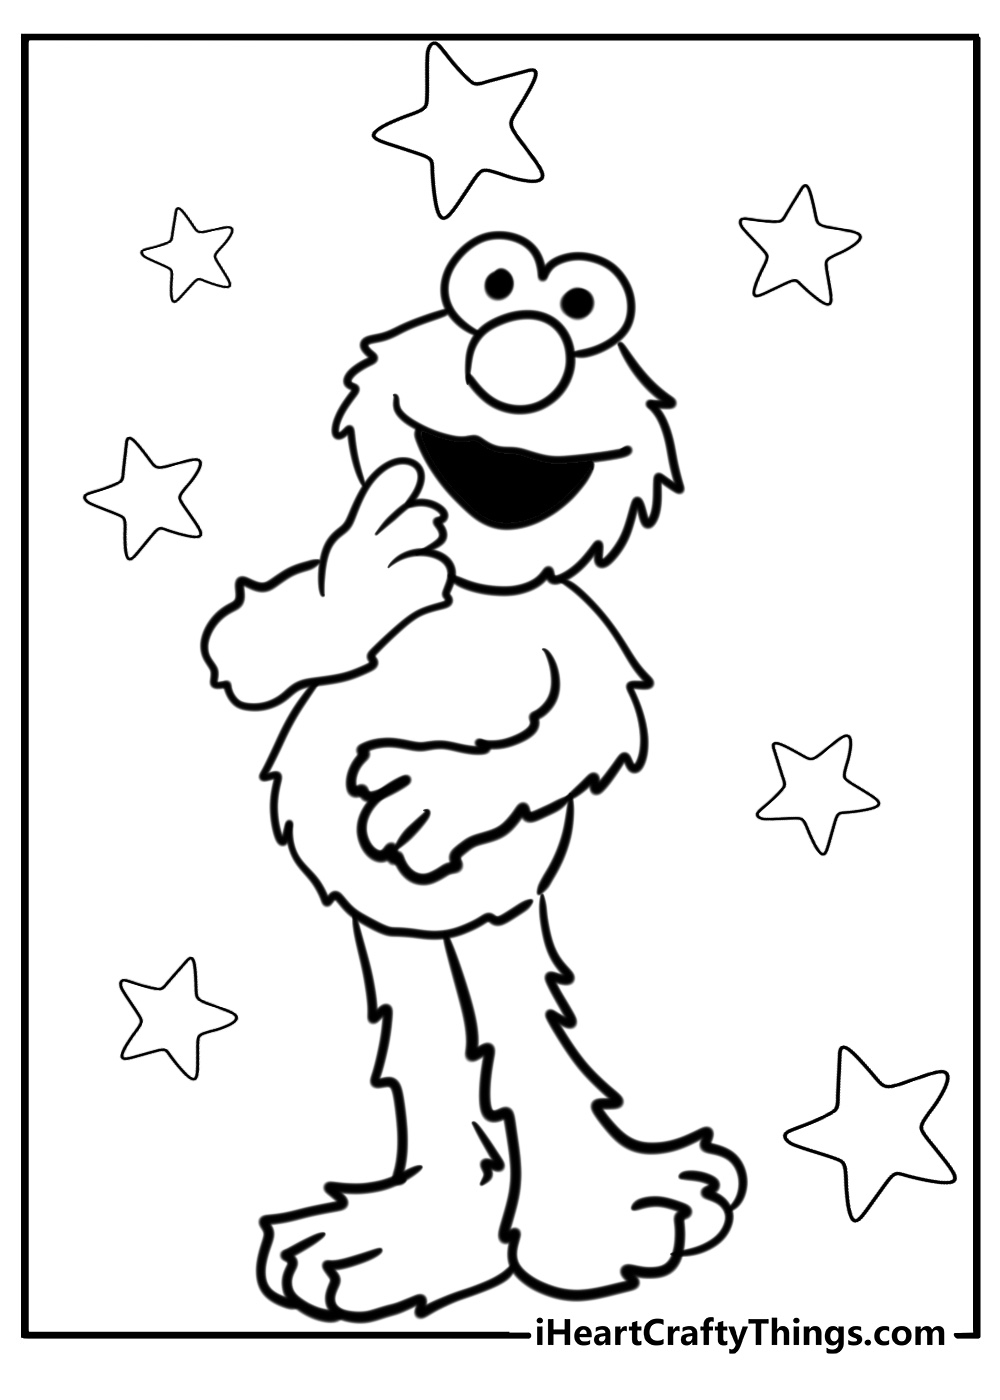 Smiling elmo coloring picture for preschoolers